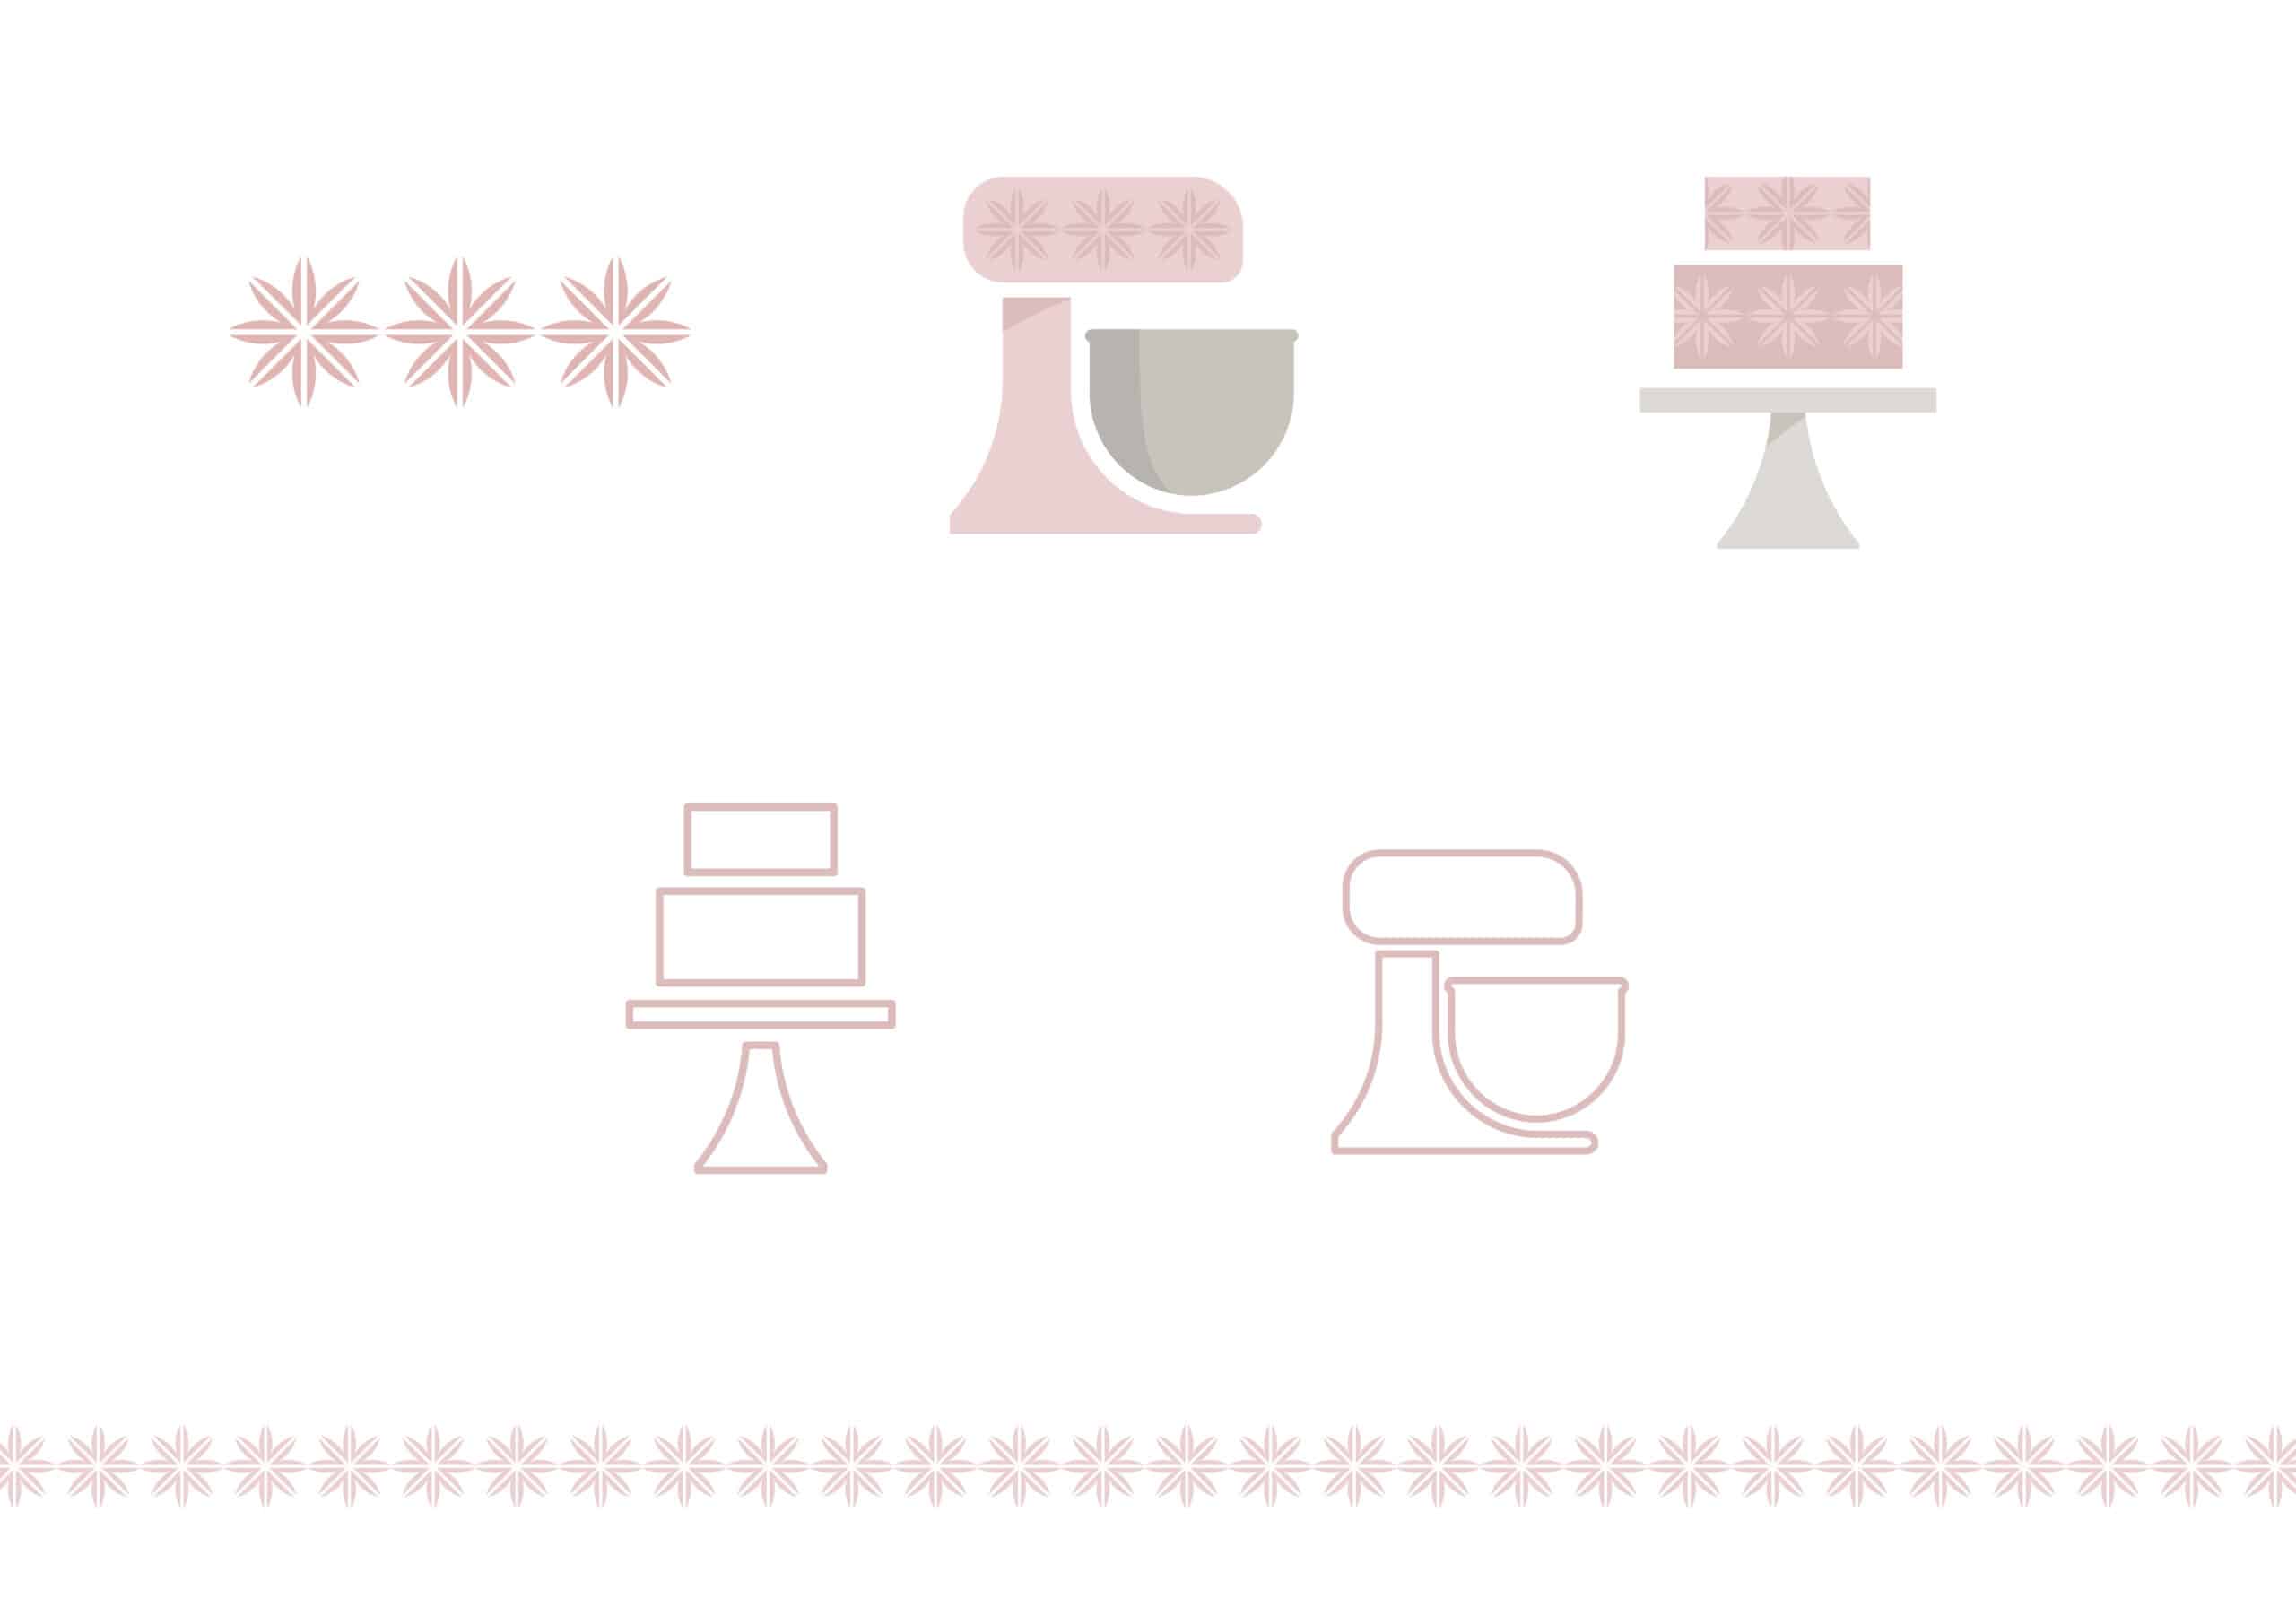 Brand assets for Little Cake Baker of a mixer and cake by Stellen Design Branding Agency in Los Angeles California